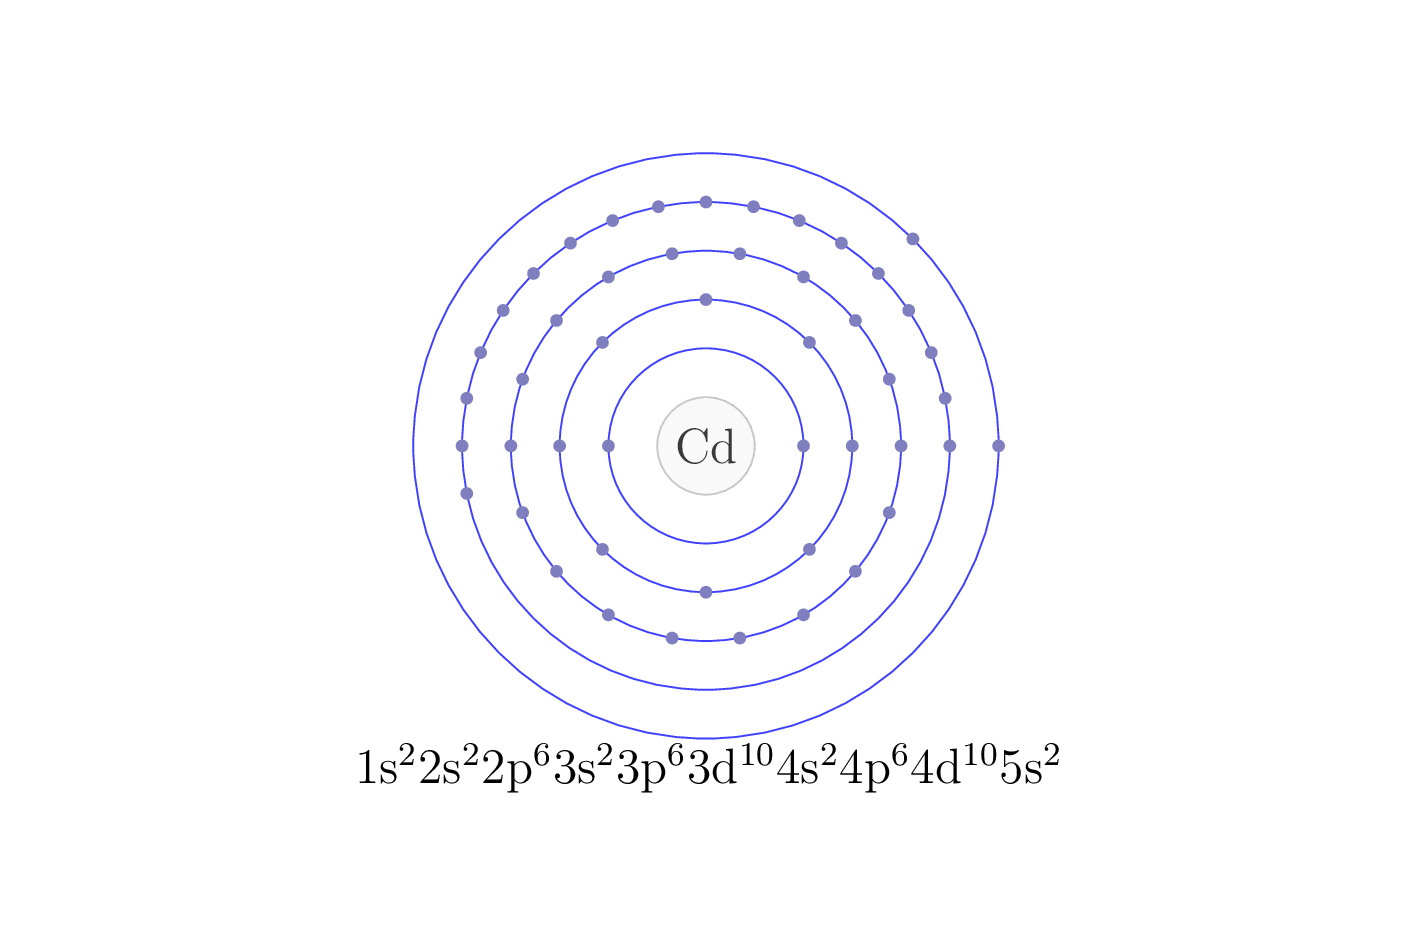 electron configuration of element Cd